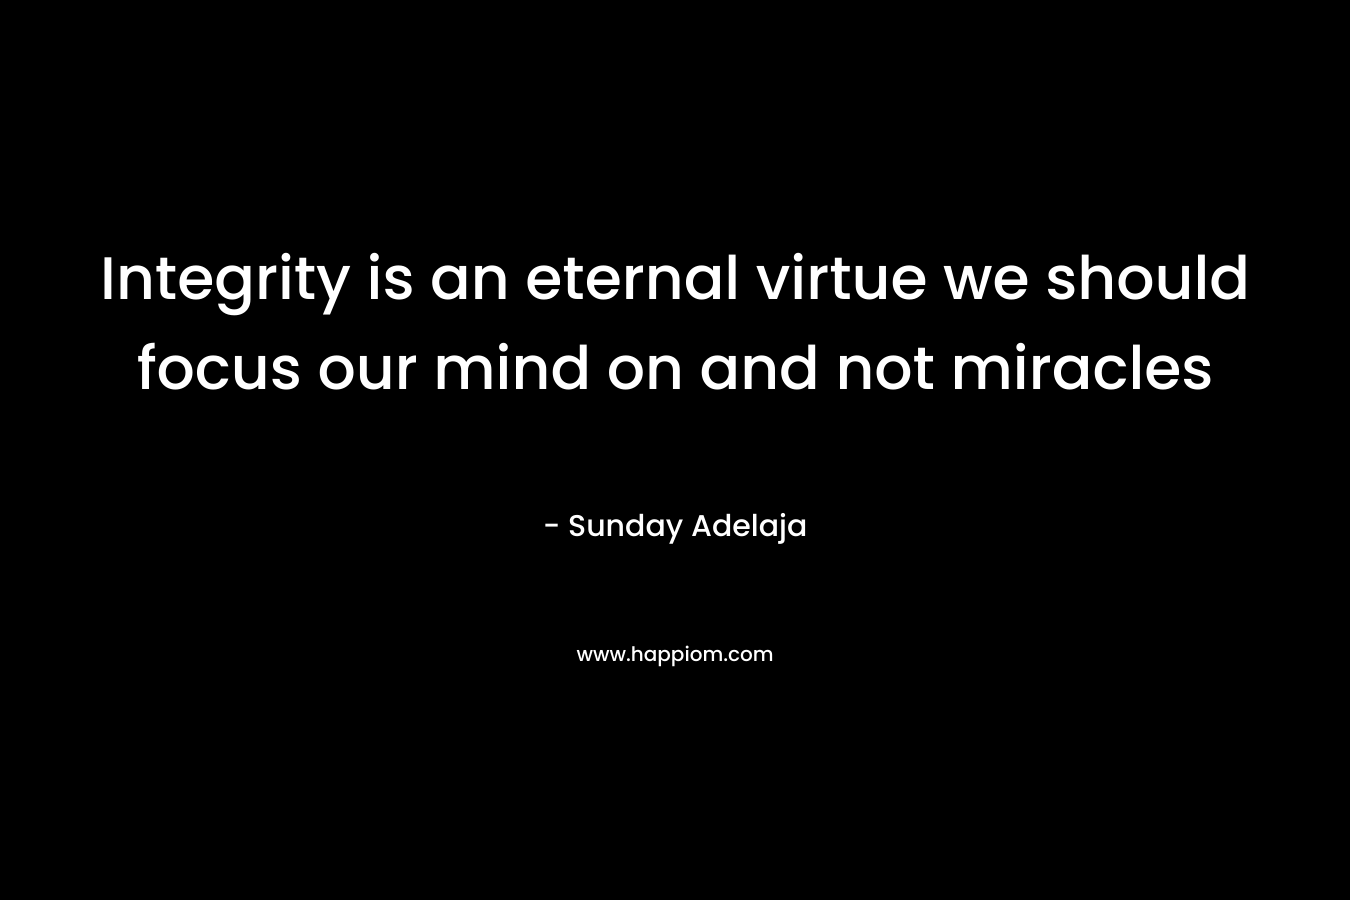 Integrity is an eternal virtue we should focus our mind on and not miracles